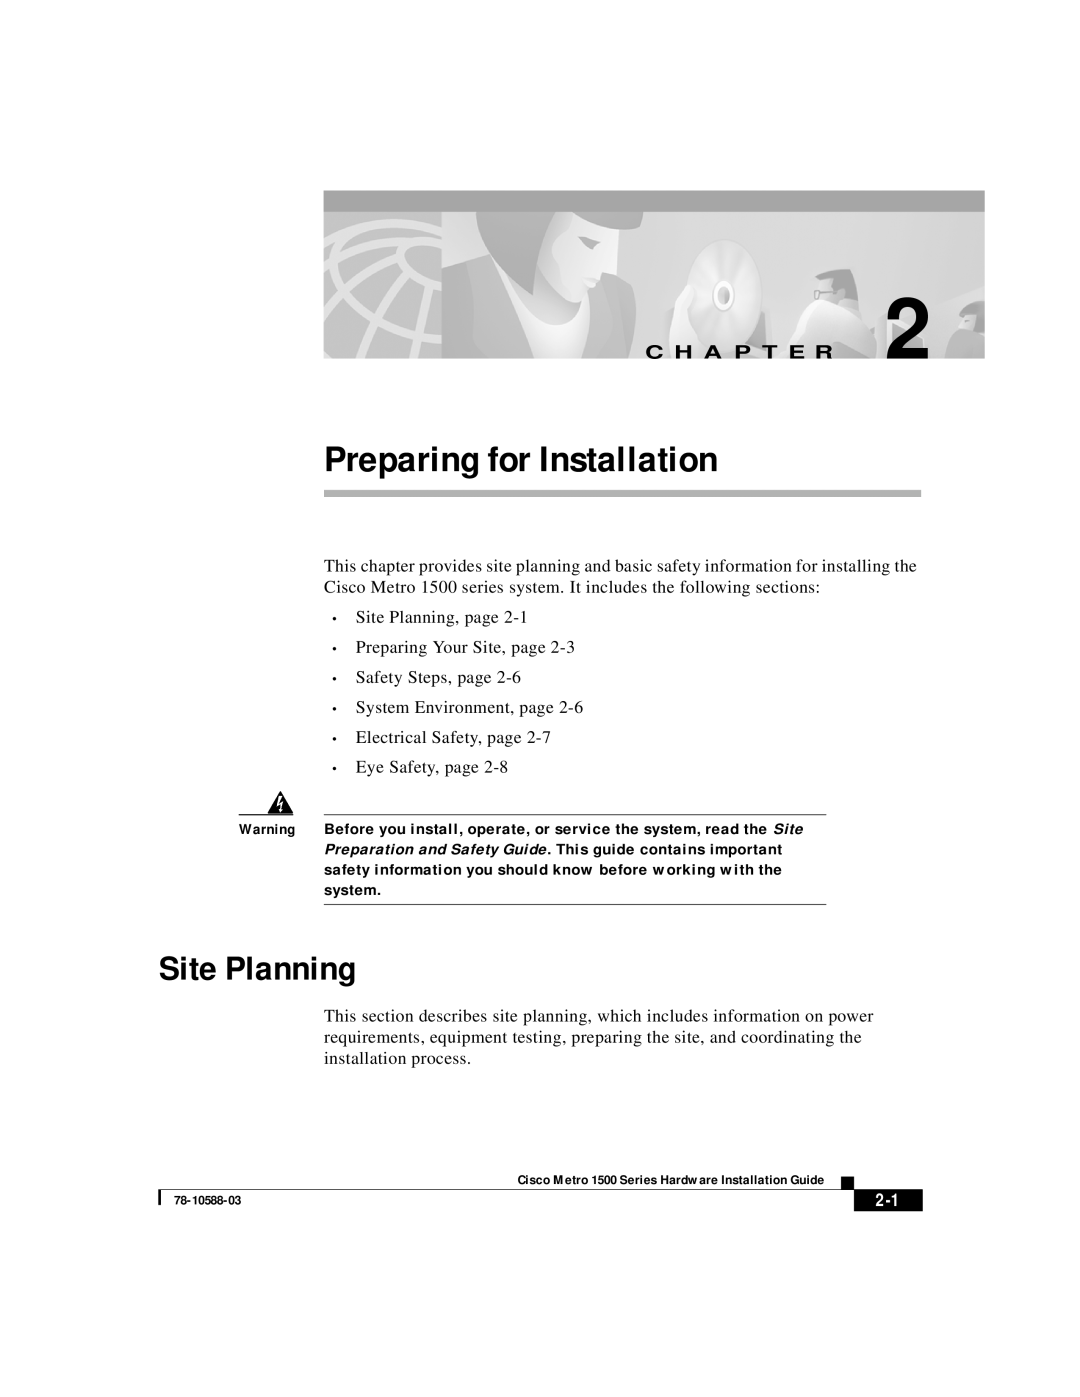 Cisco Systems 1500 manual Site Planning, Preparing for Installation, C H A P T E R 